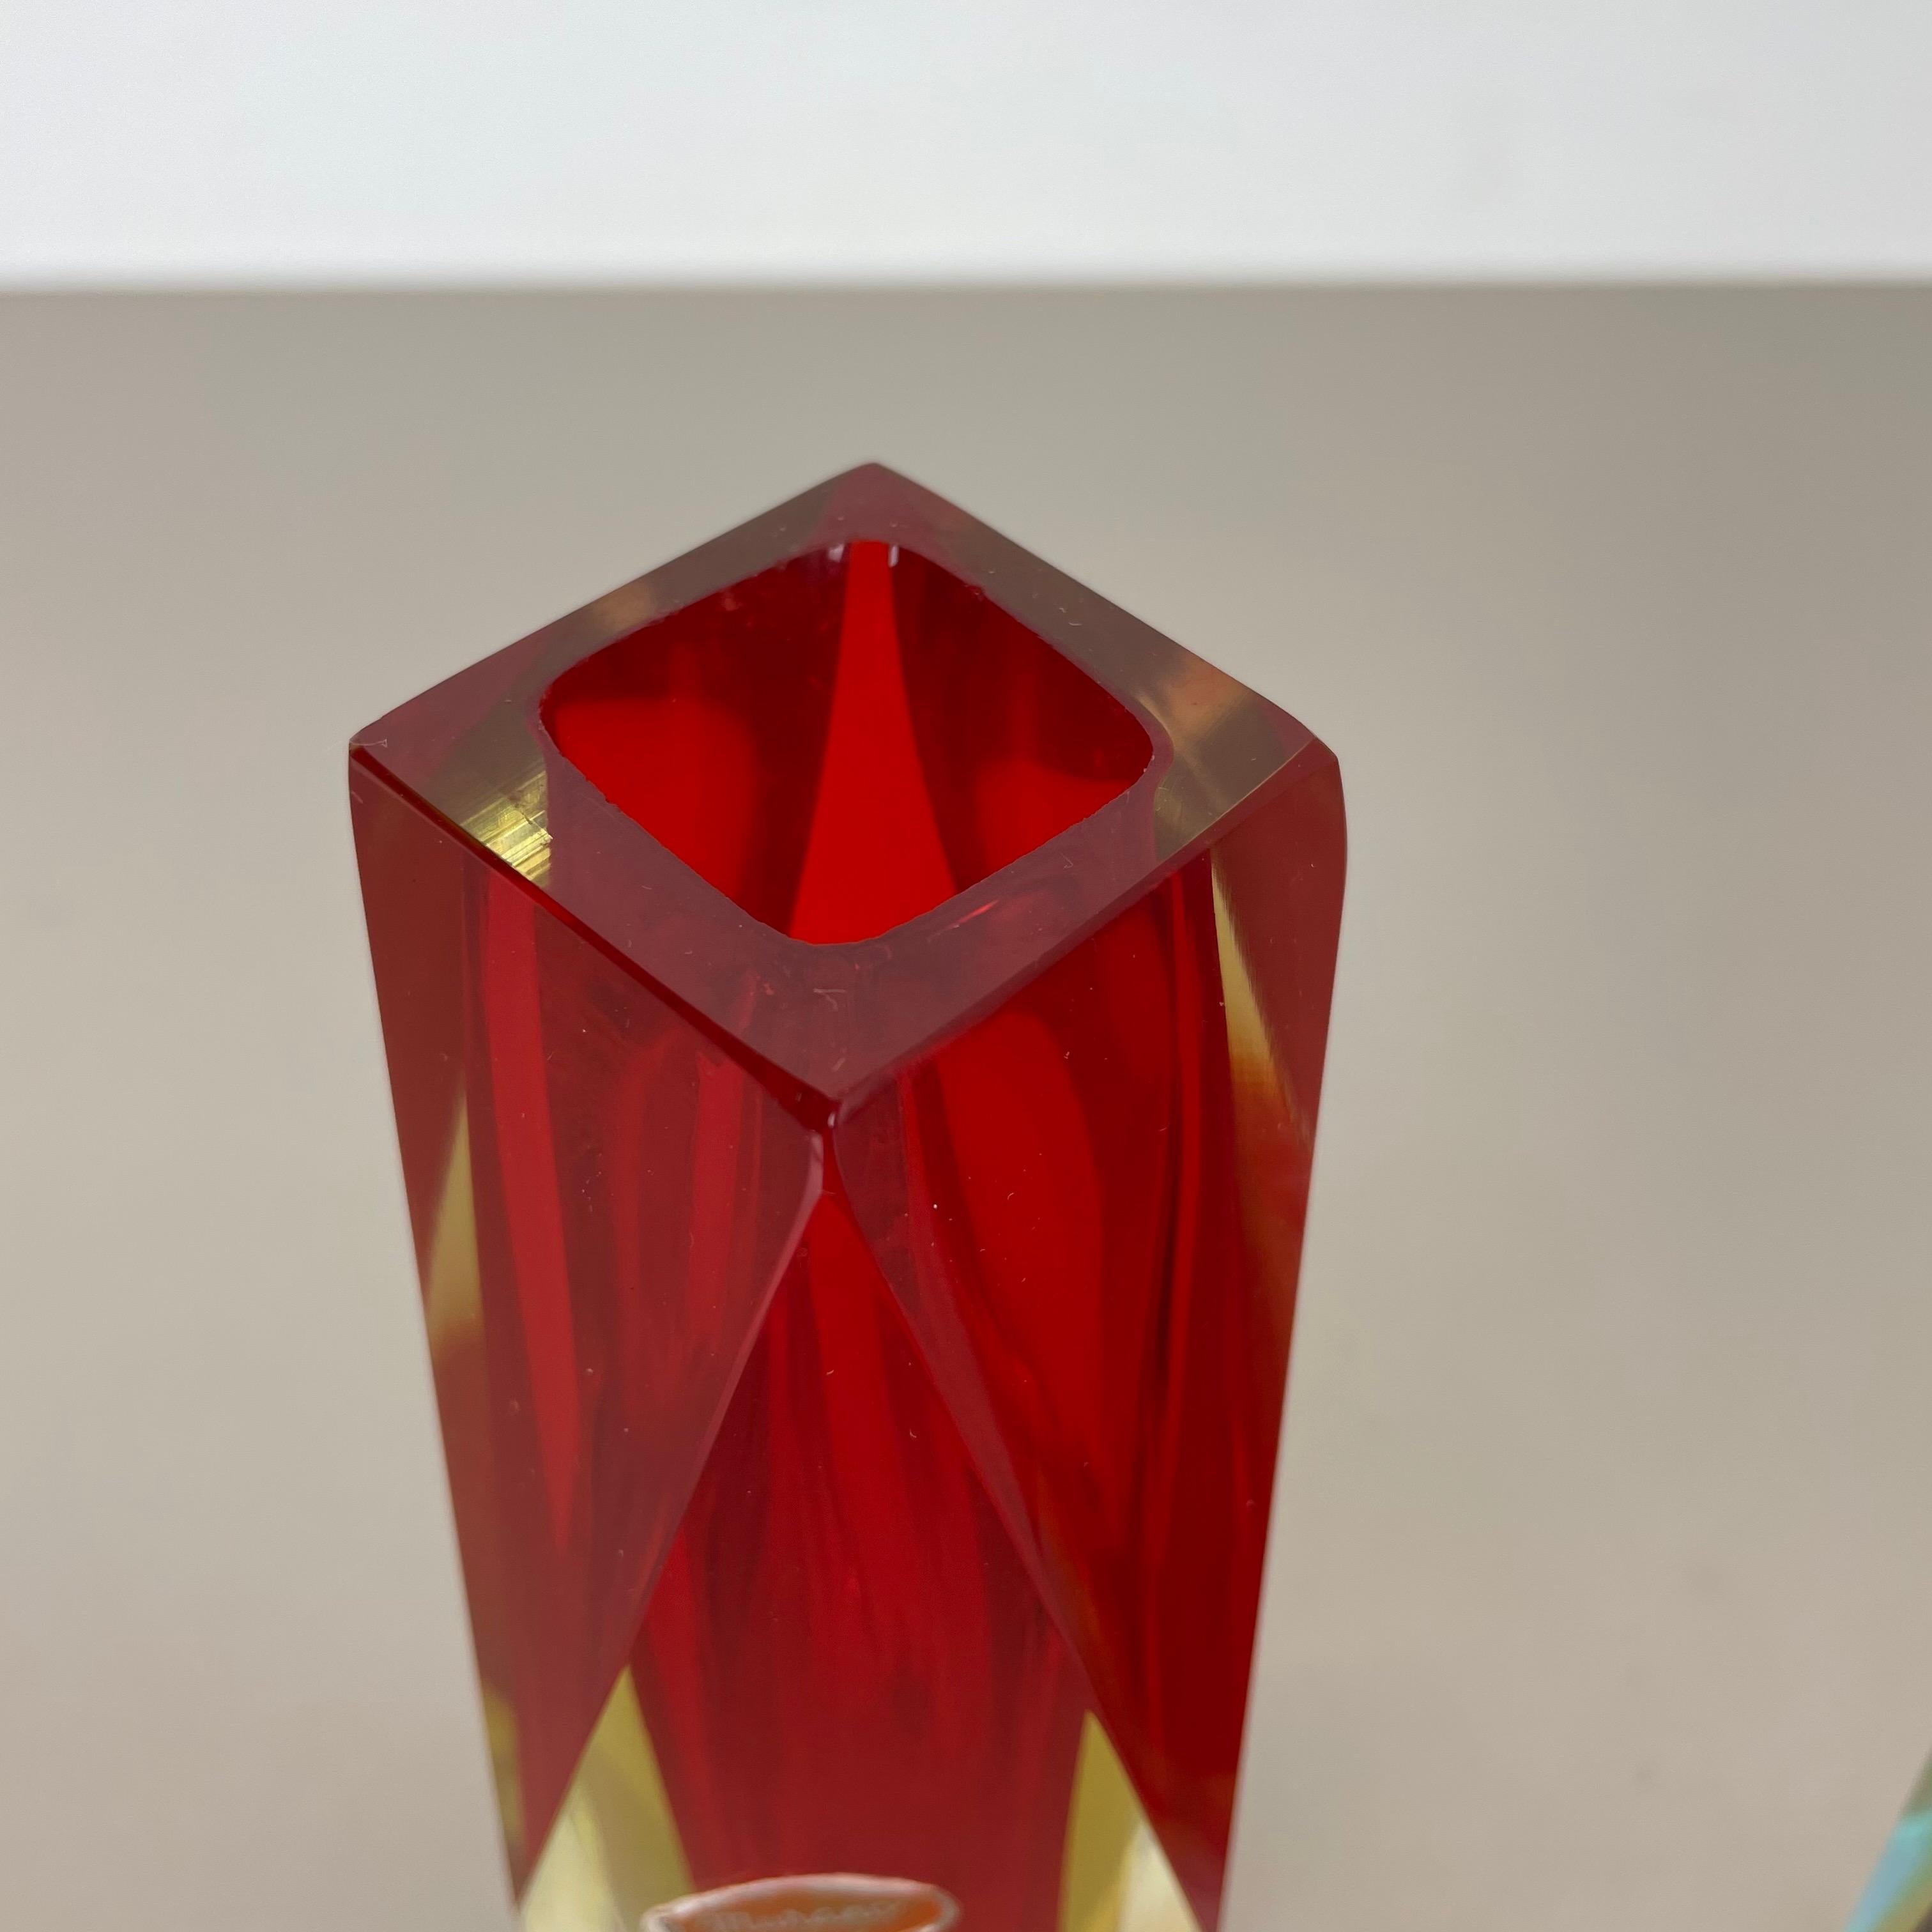 Set of 2 Faceted Murano Glass Sommerso Vase Designed by Flavio Poli Italy, 1970s For Sale 1